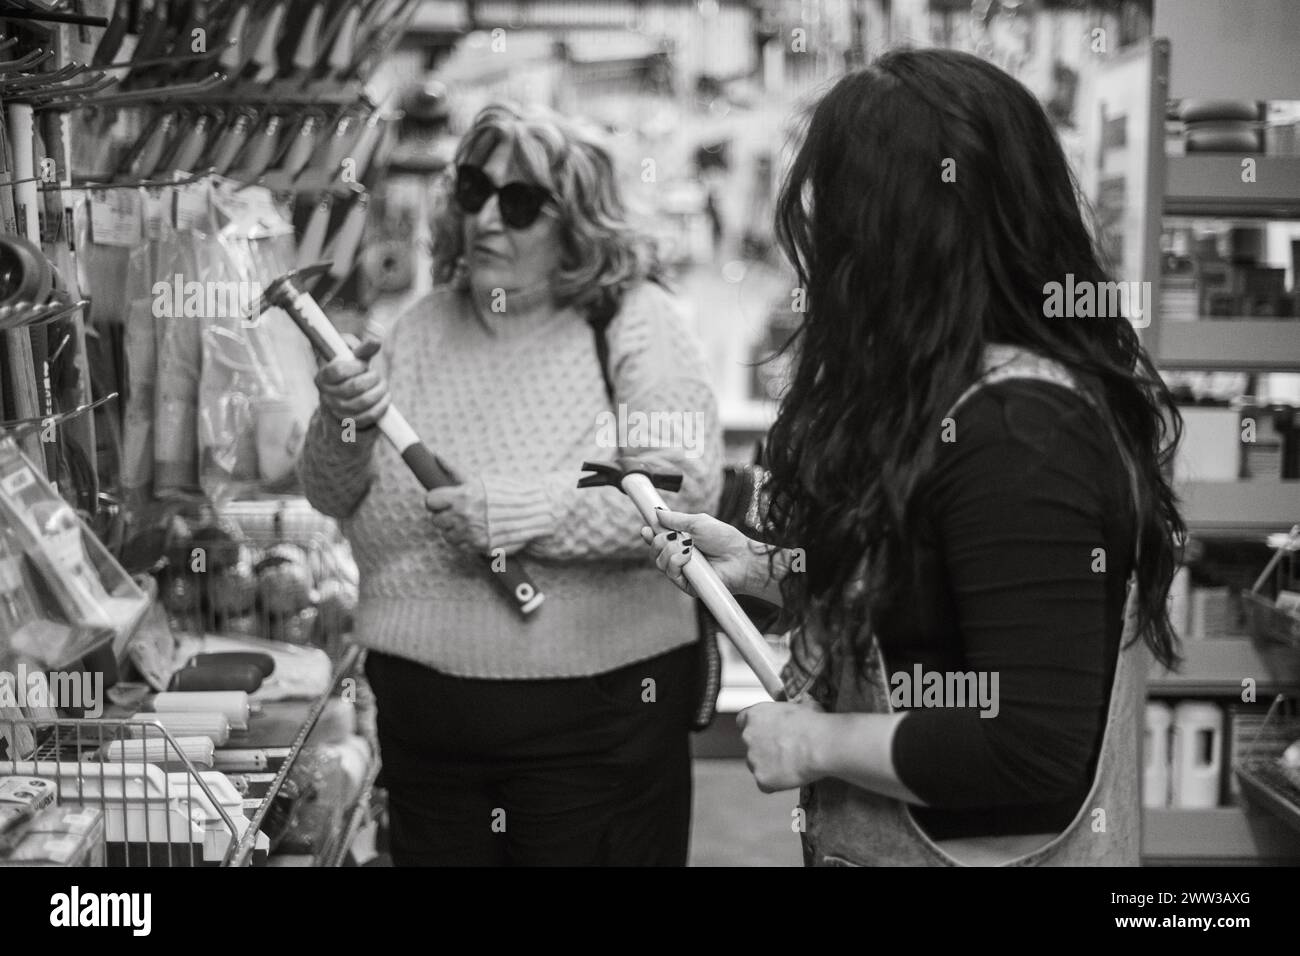 Monochrome image of two women interacting over a tool selection in a hardware store Stock Photo